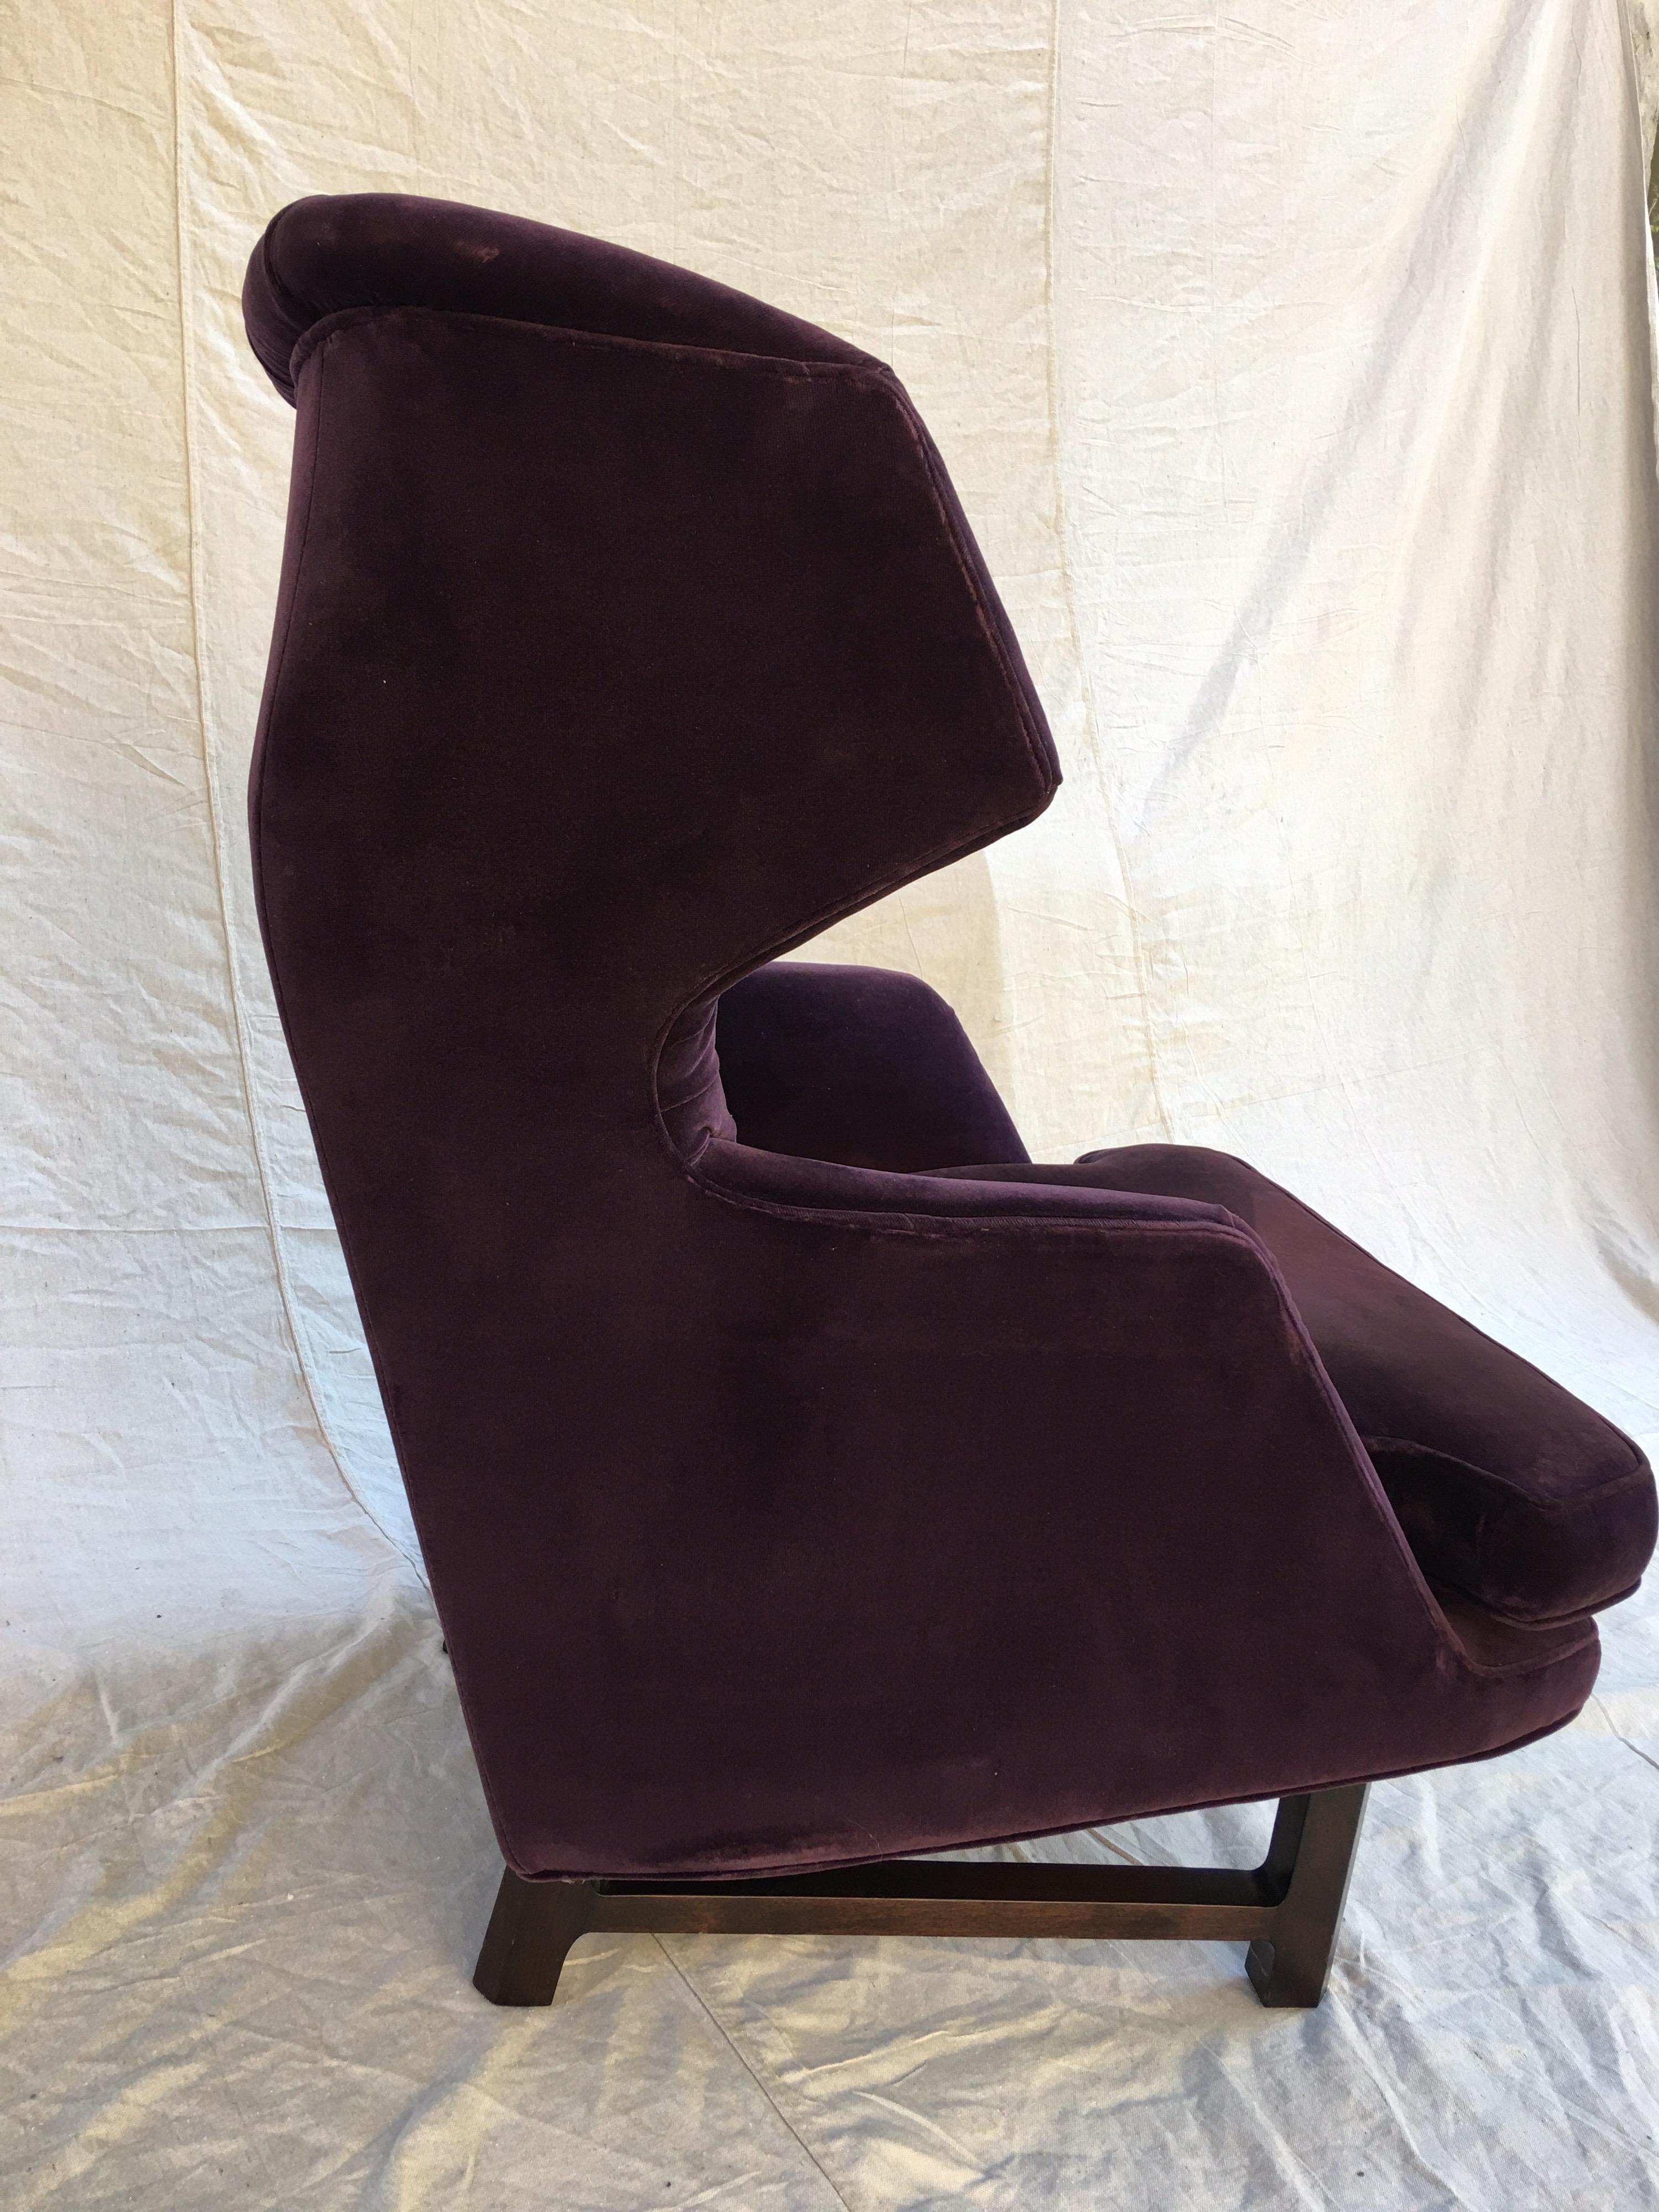 Mid-20th Century Edward Wormley for Dunbar Janus  Wing Back Lounge Chair